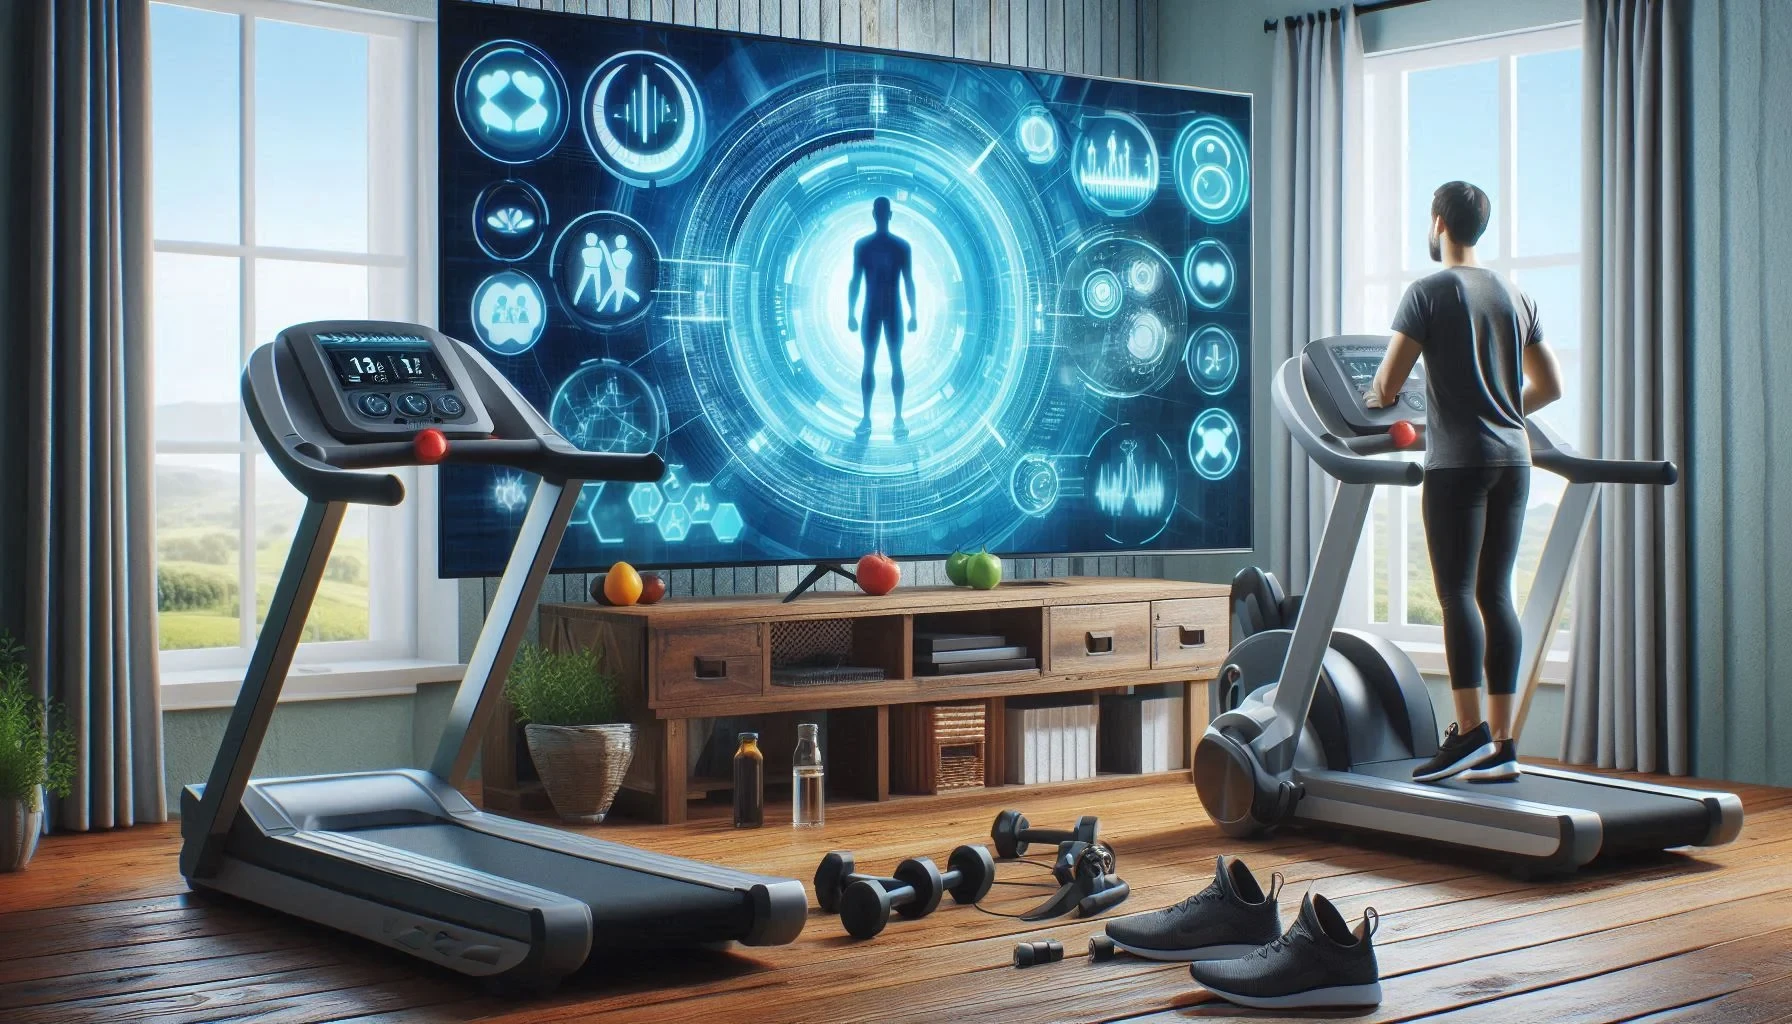 Tips for Choosing the Best Interactive Fitness Gear